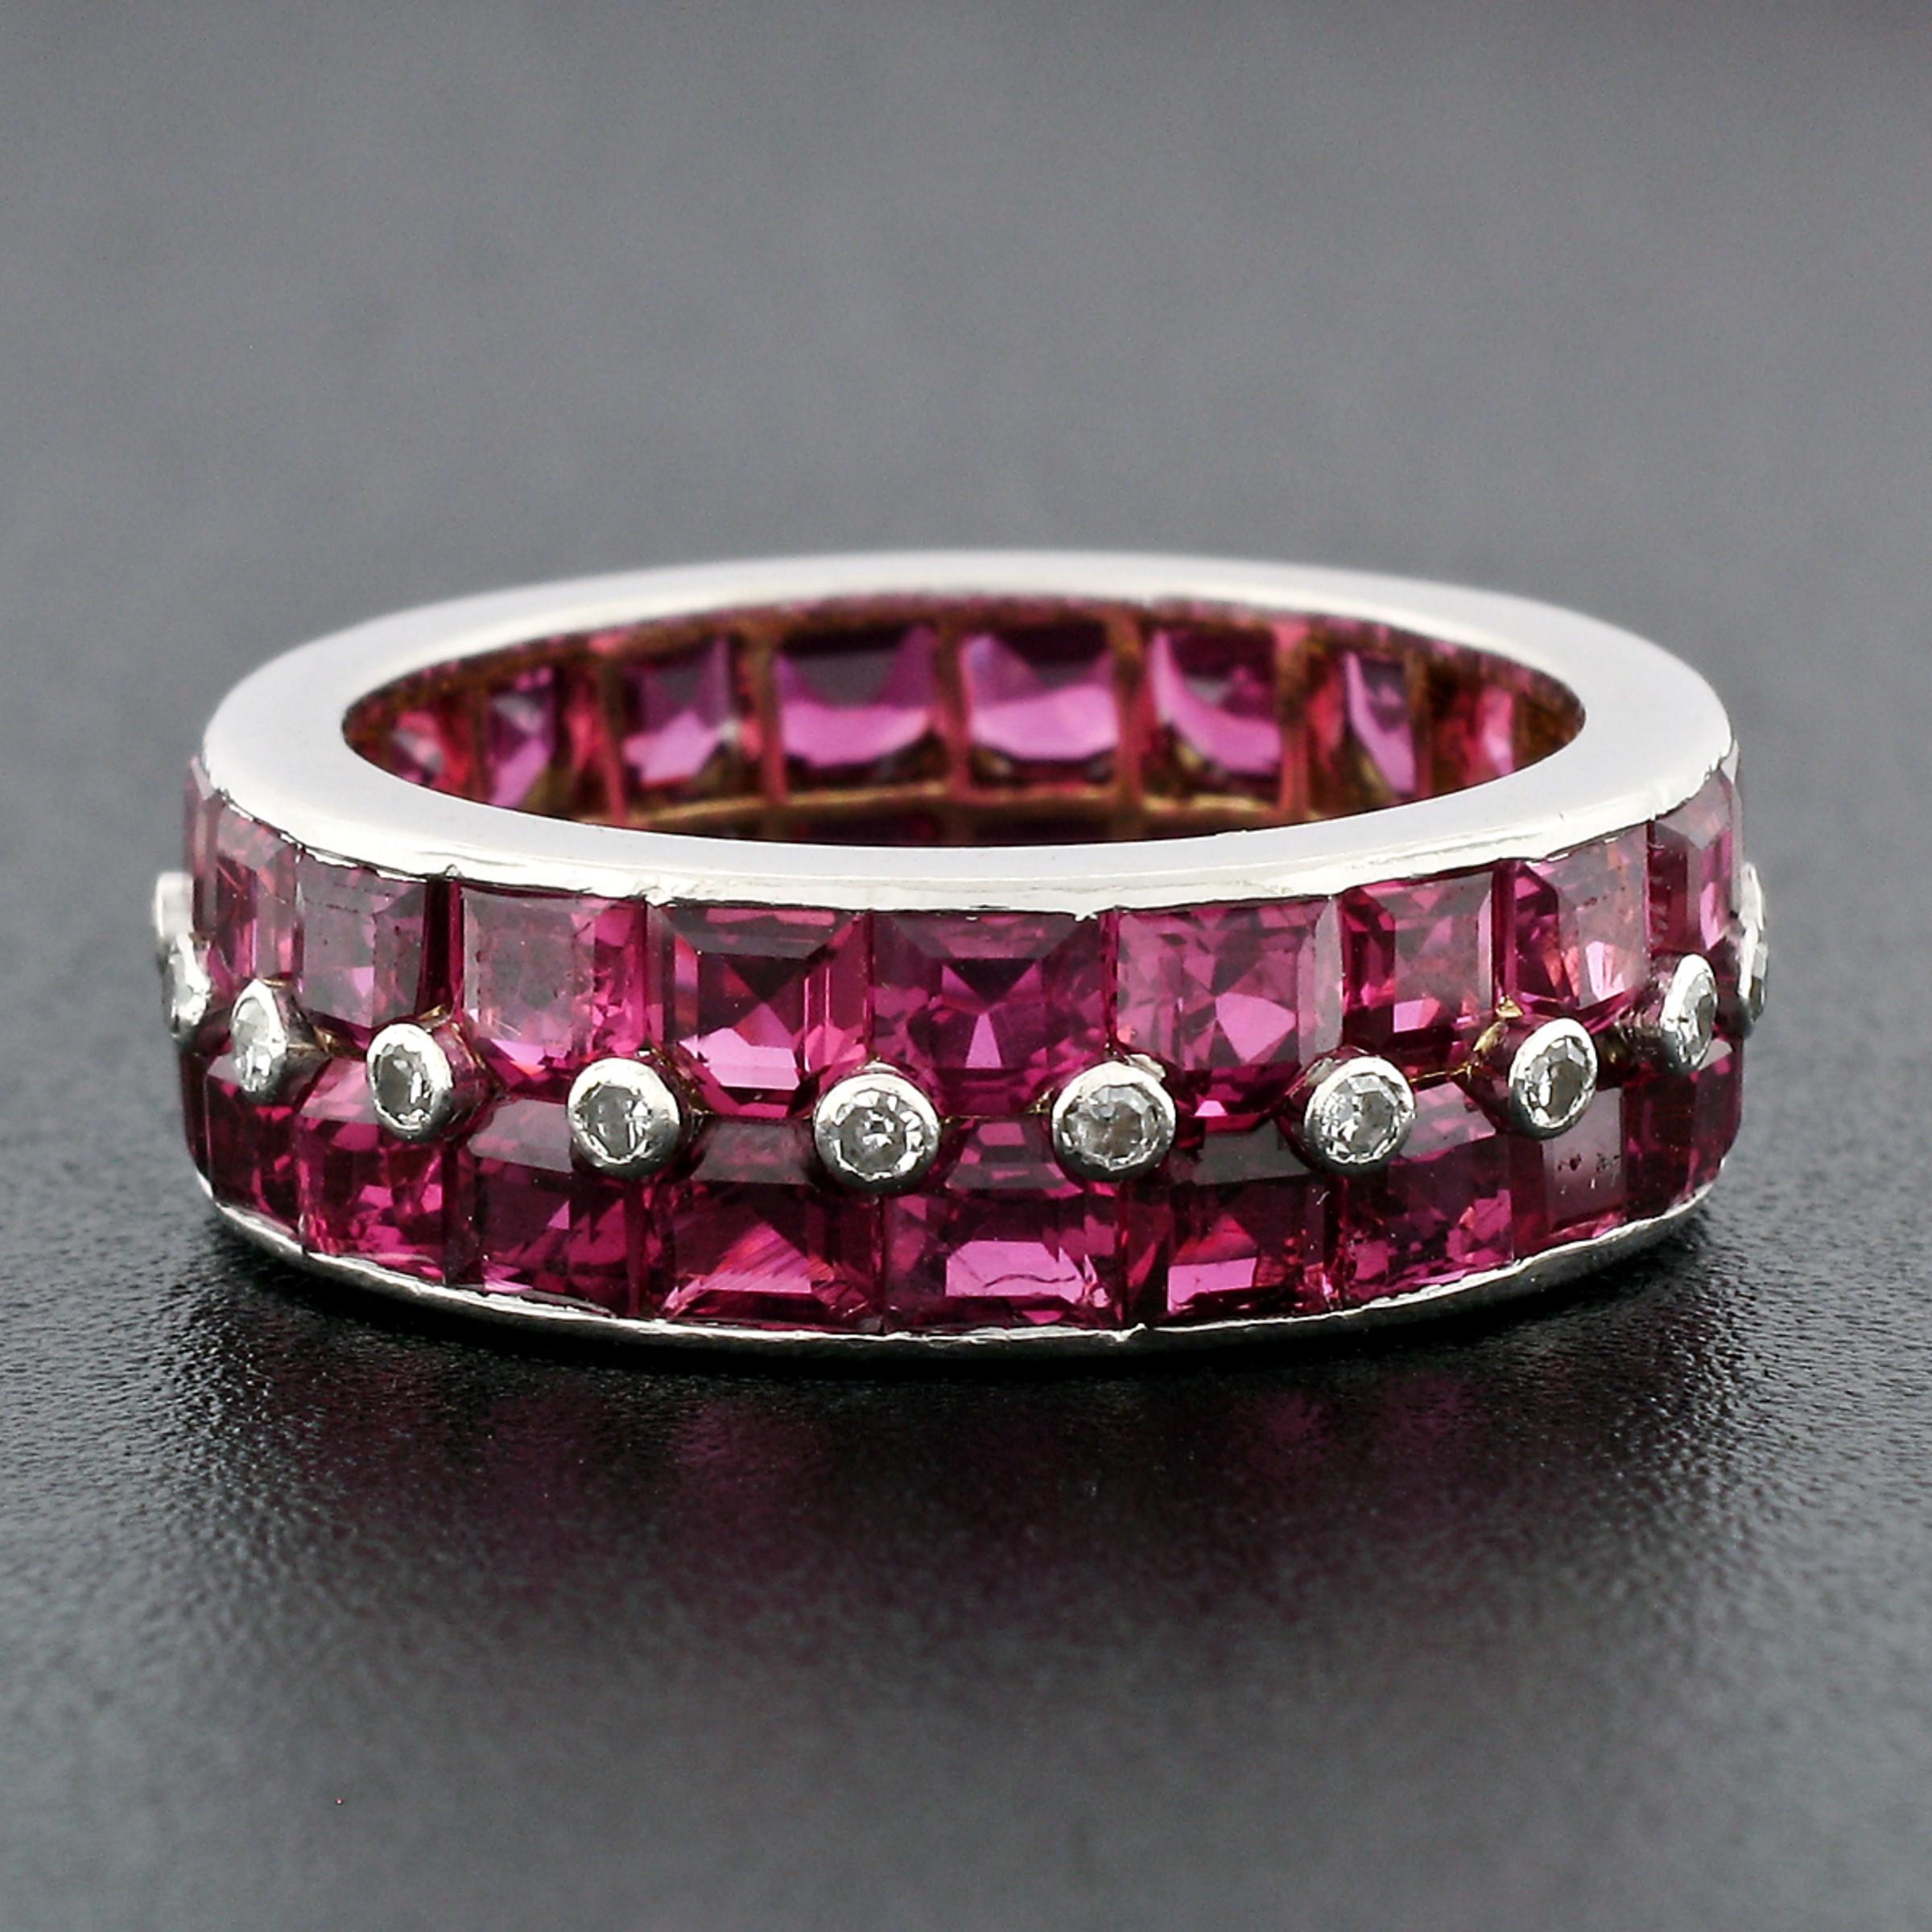 Here we have an absolutely breathtaking antique ruby and diamond wide eternity band ring, crafted from solid platinum and 18k yellow gold. The band features two rows of square step cut channel set rubies, adorned by bezel set diamonds throughout.